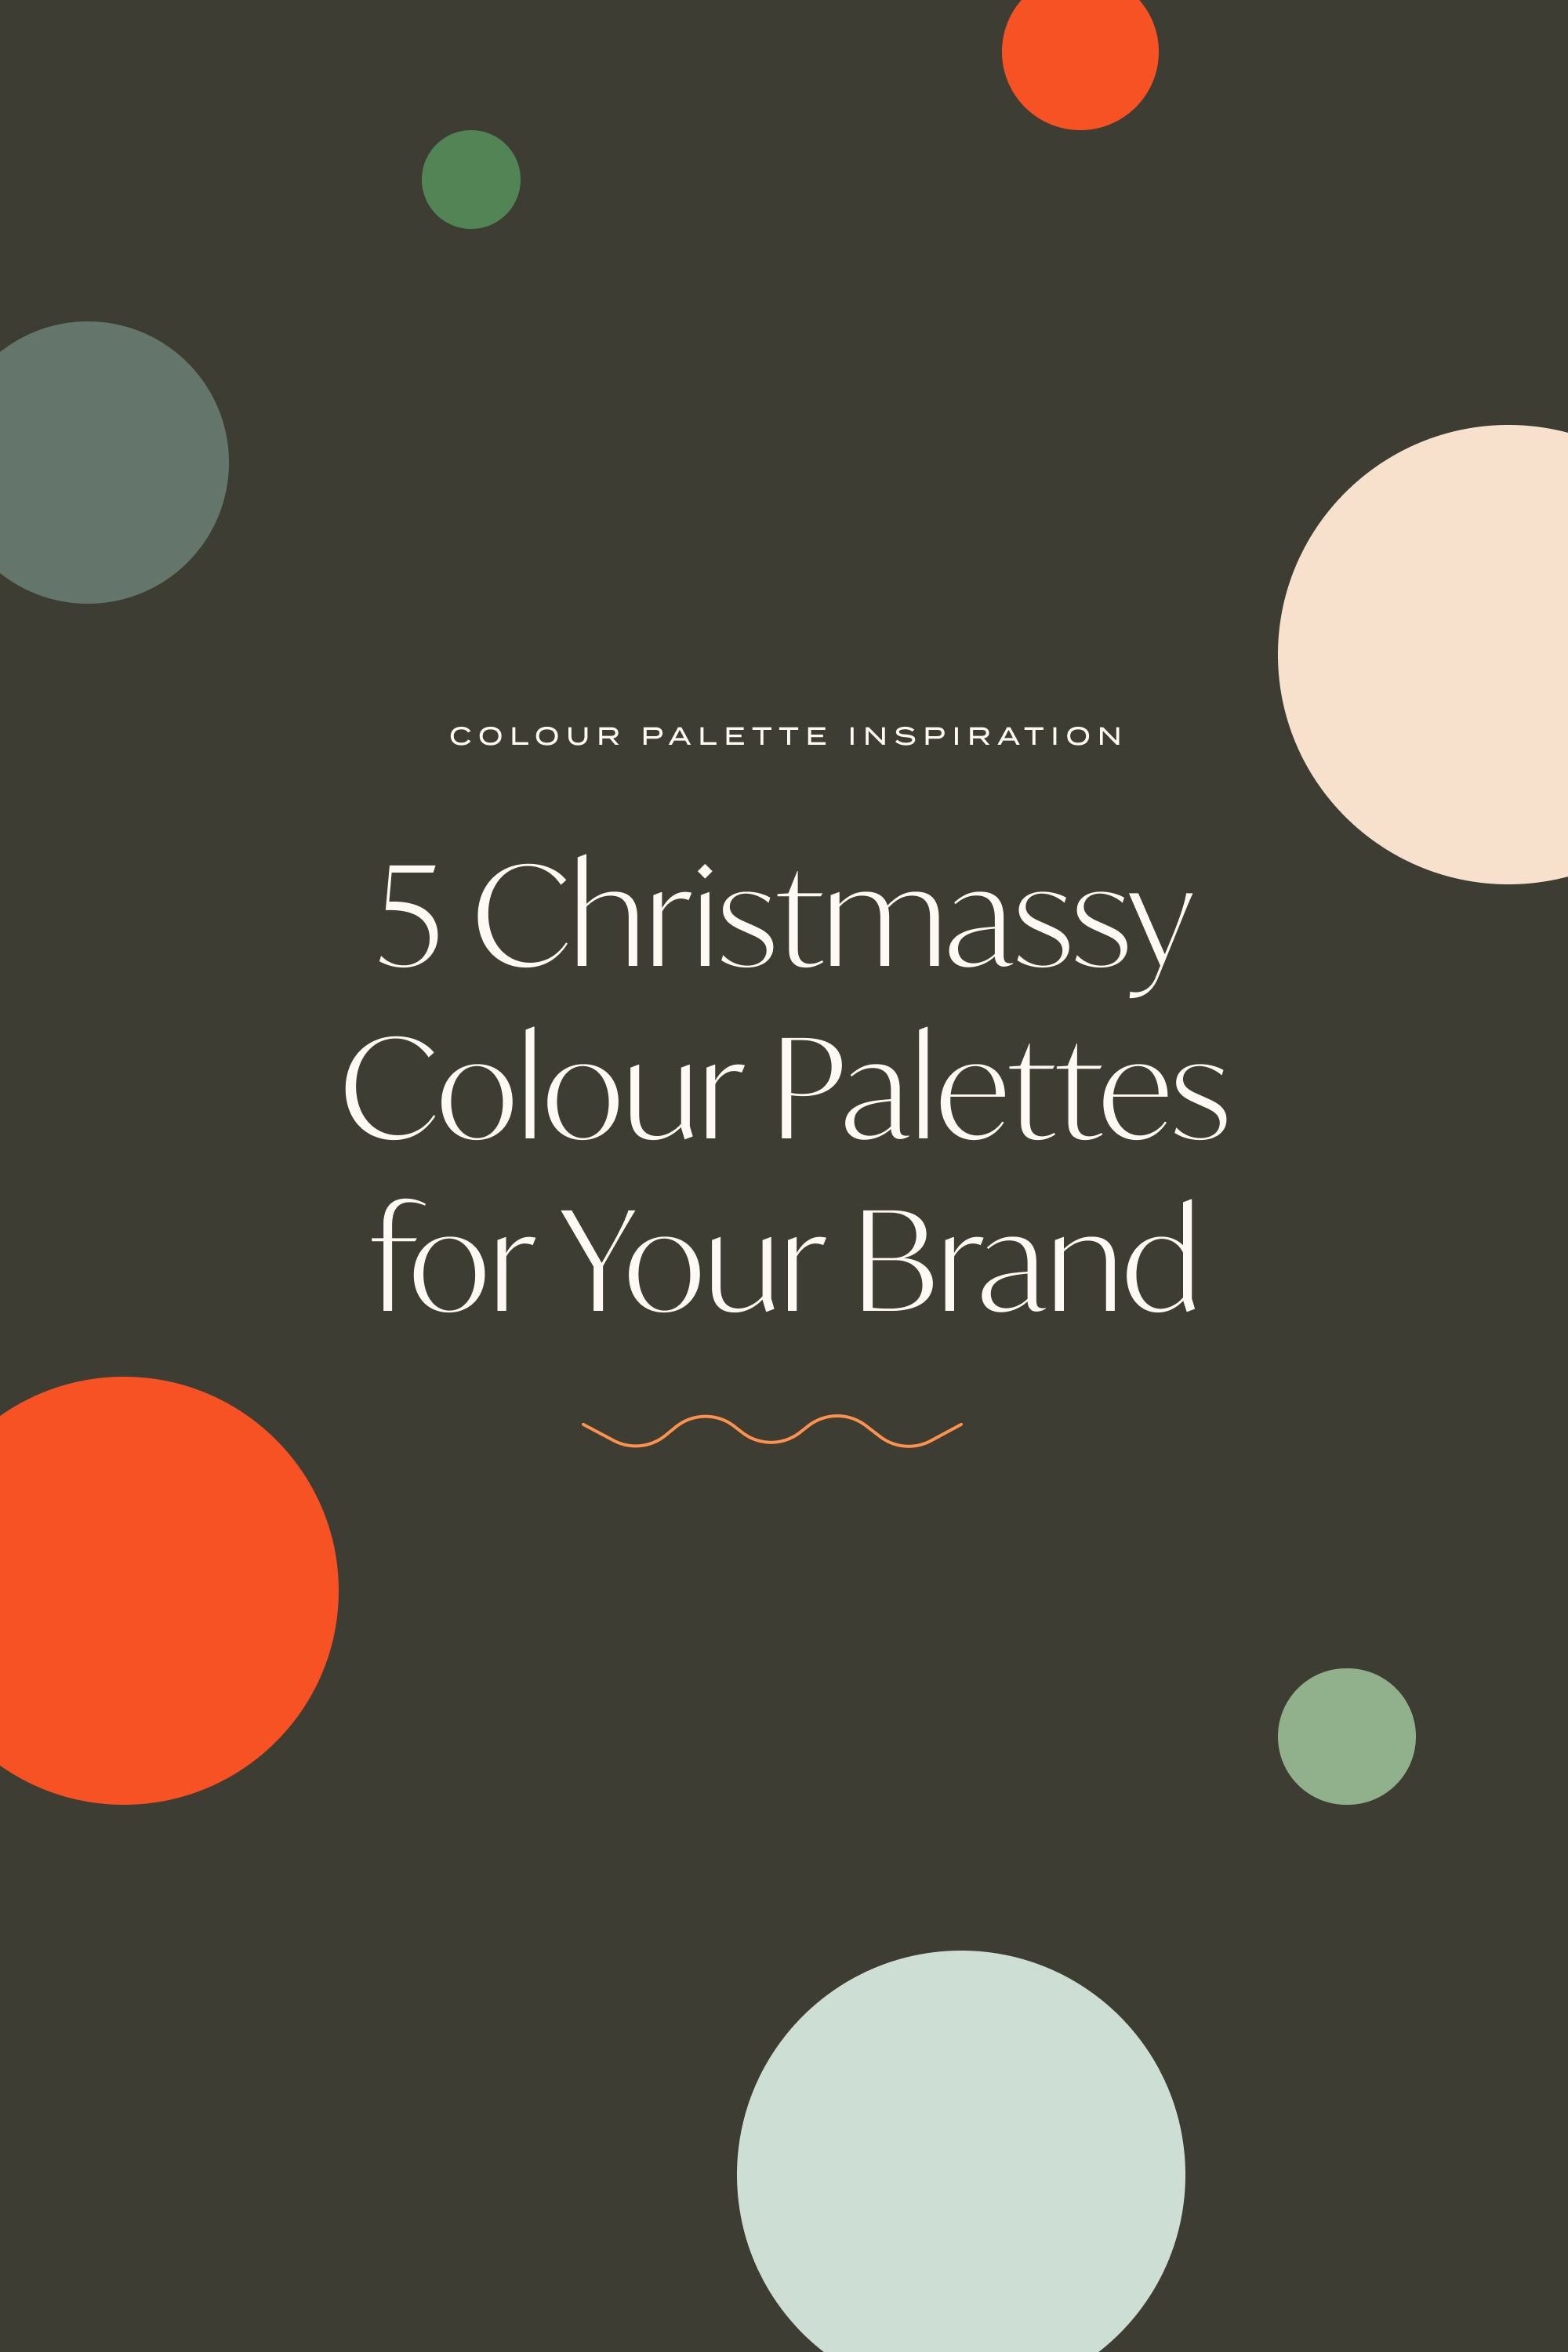 5 Christmassy Colour Palettes for Your Brand